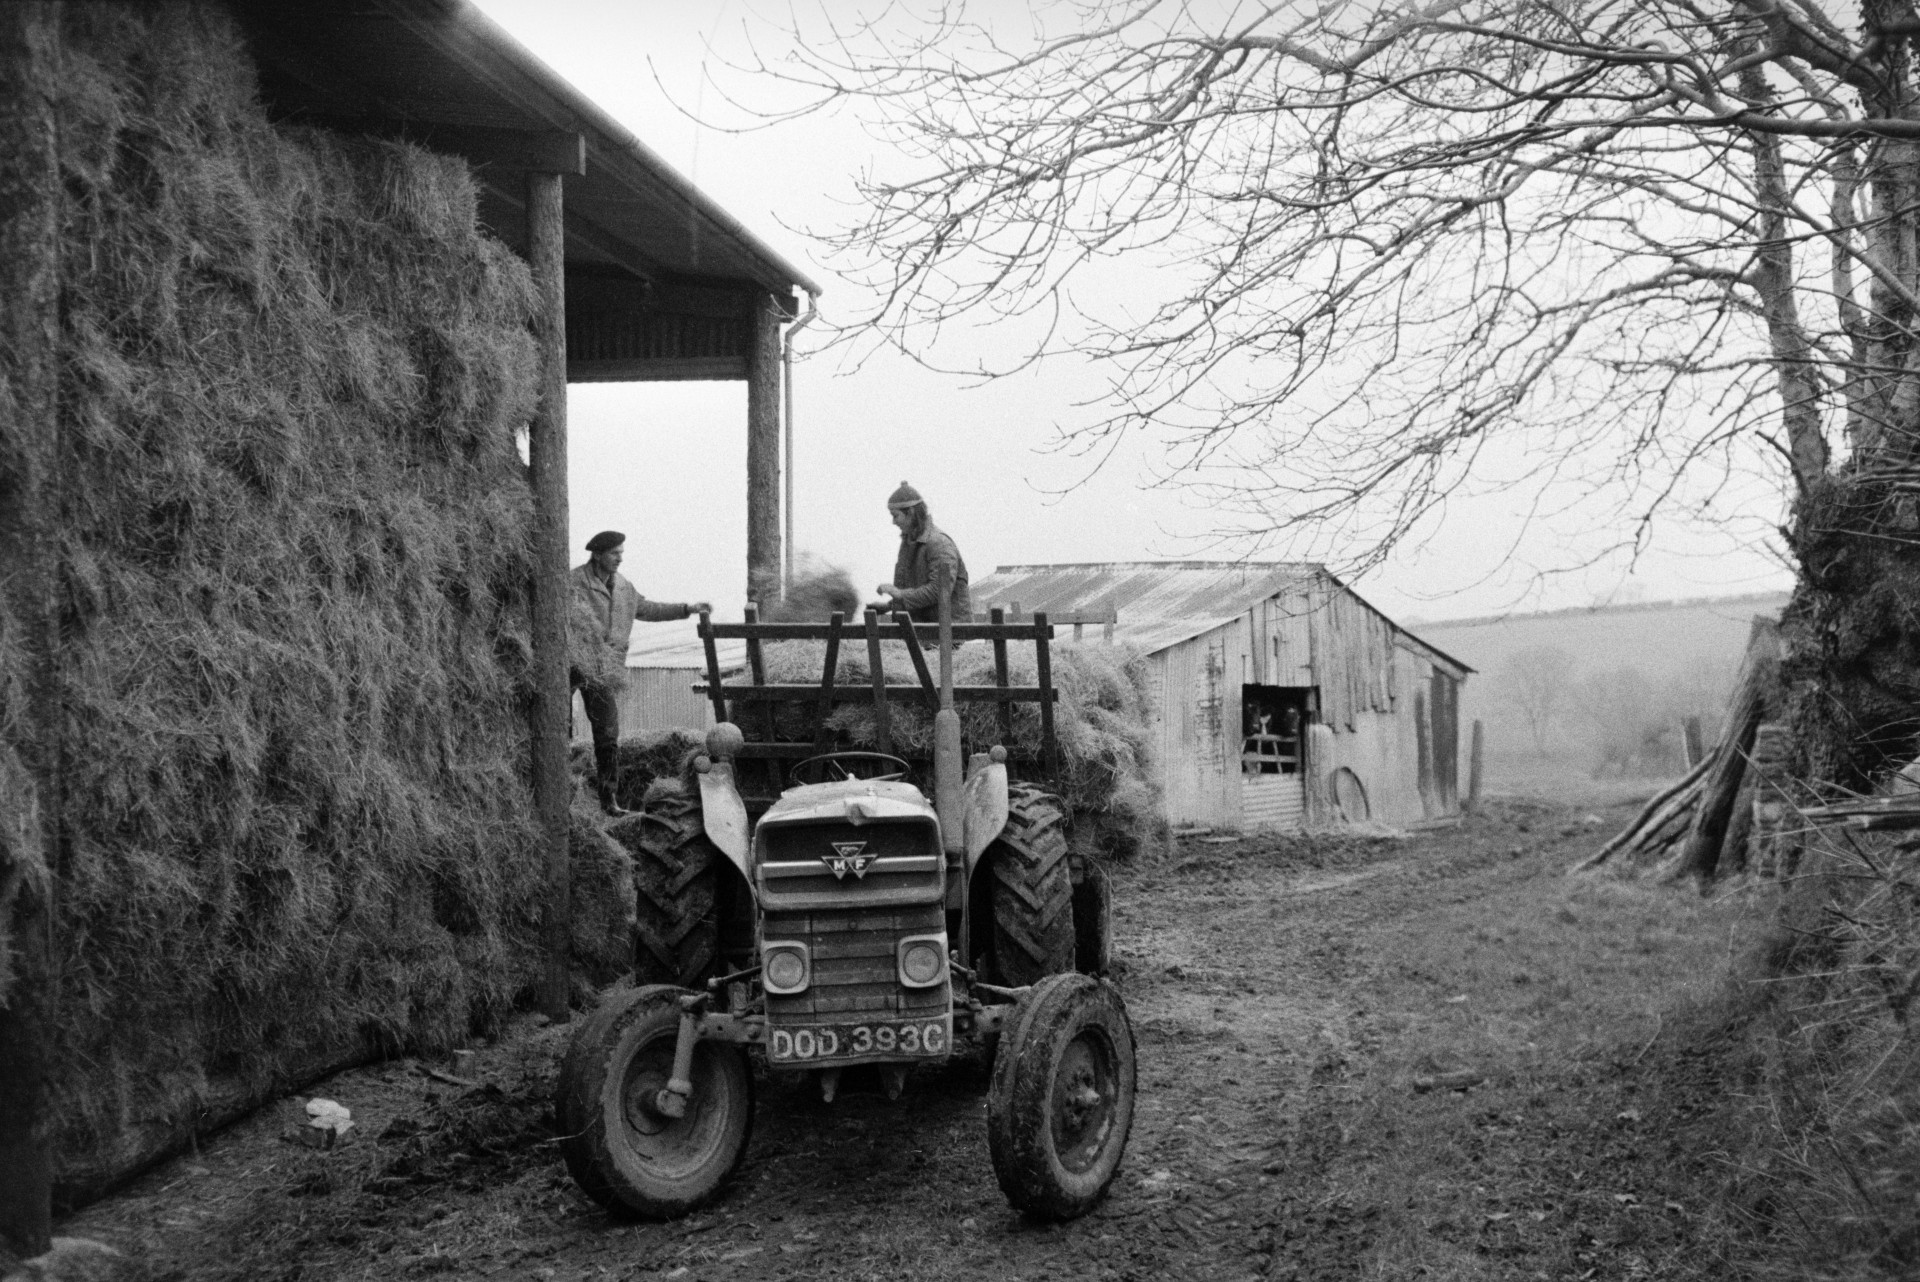 Derek Bright, on the trailer, and Ivor Bourne, loading hay bales onto a trailer to be distributed around Mill Road Farm, Beaford, for winter. Cattle looking out of a corrugated iron barn are visible in the background.